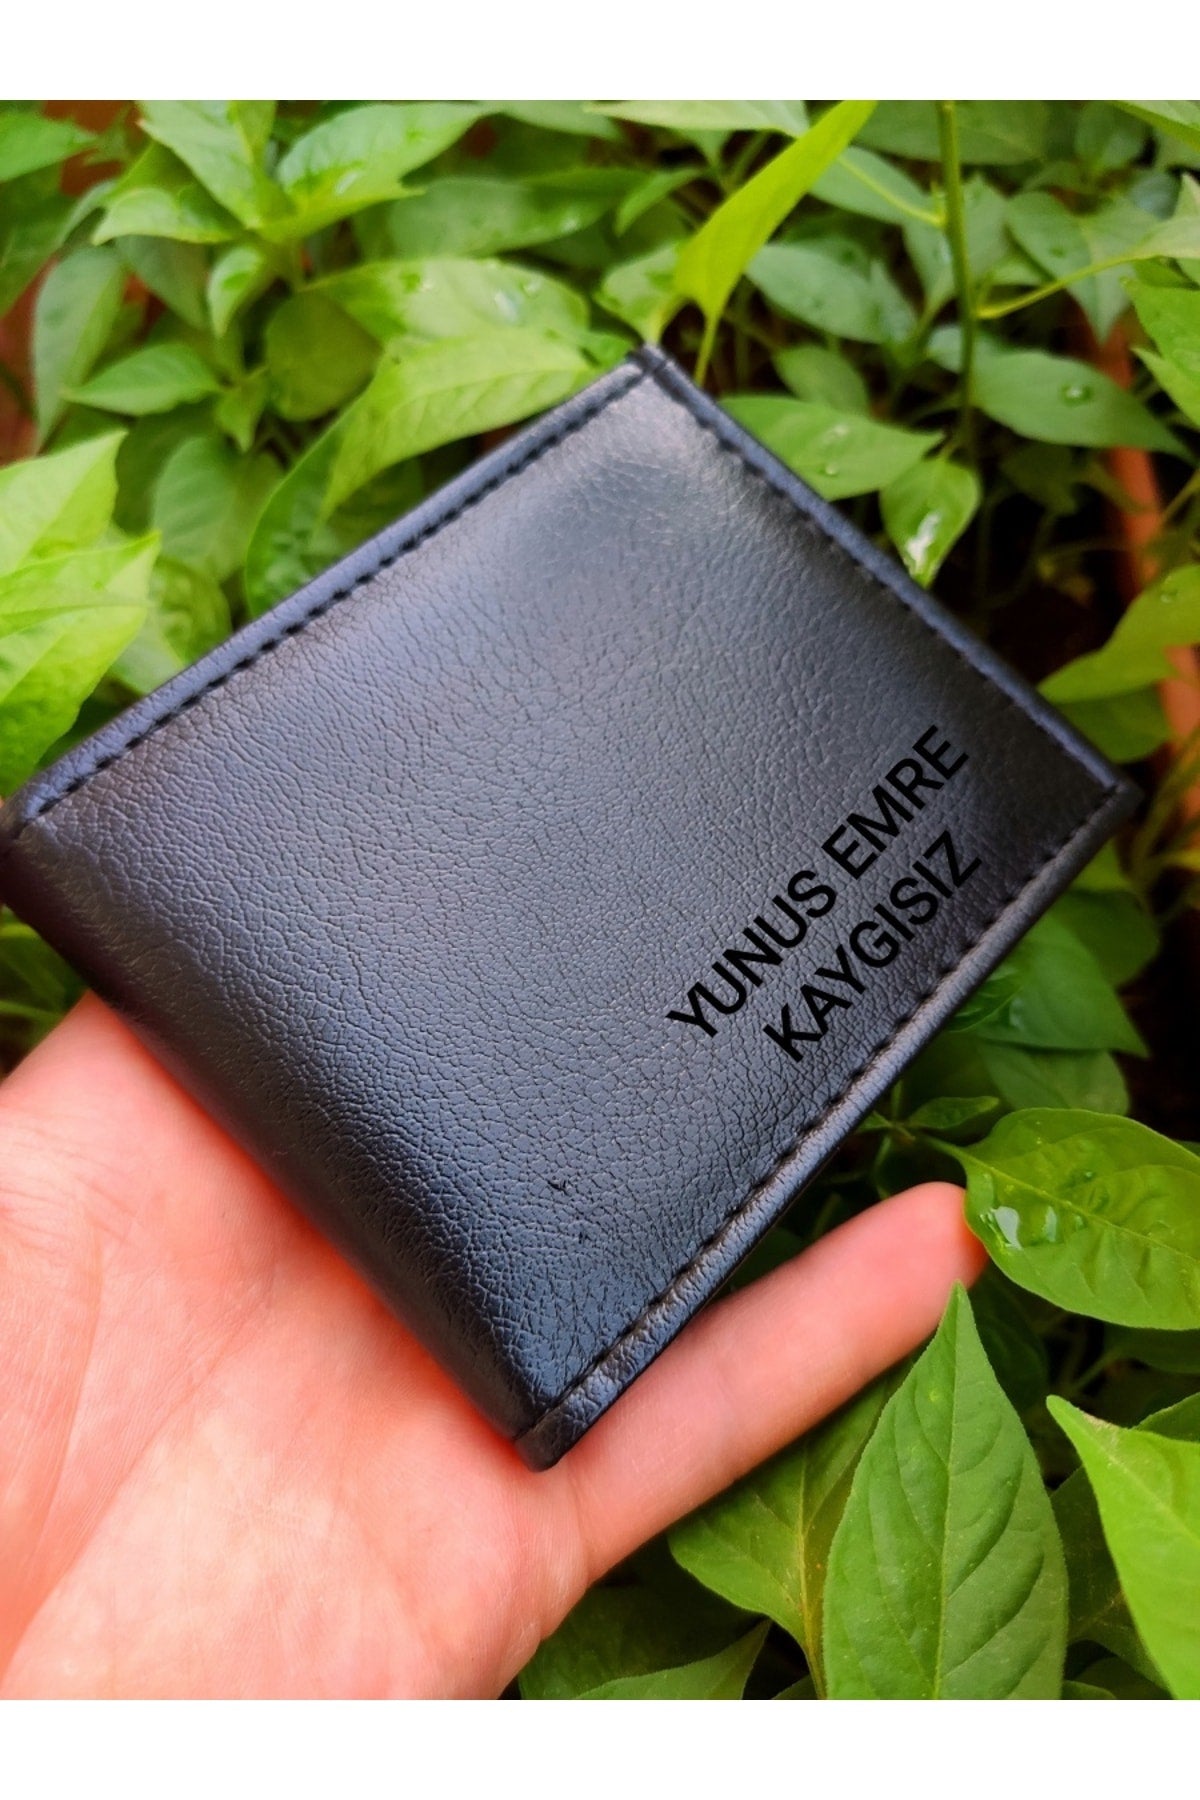 Black Men's Wallet Personalized with Name Printed